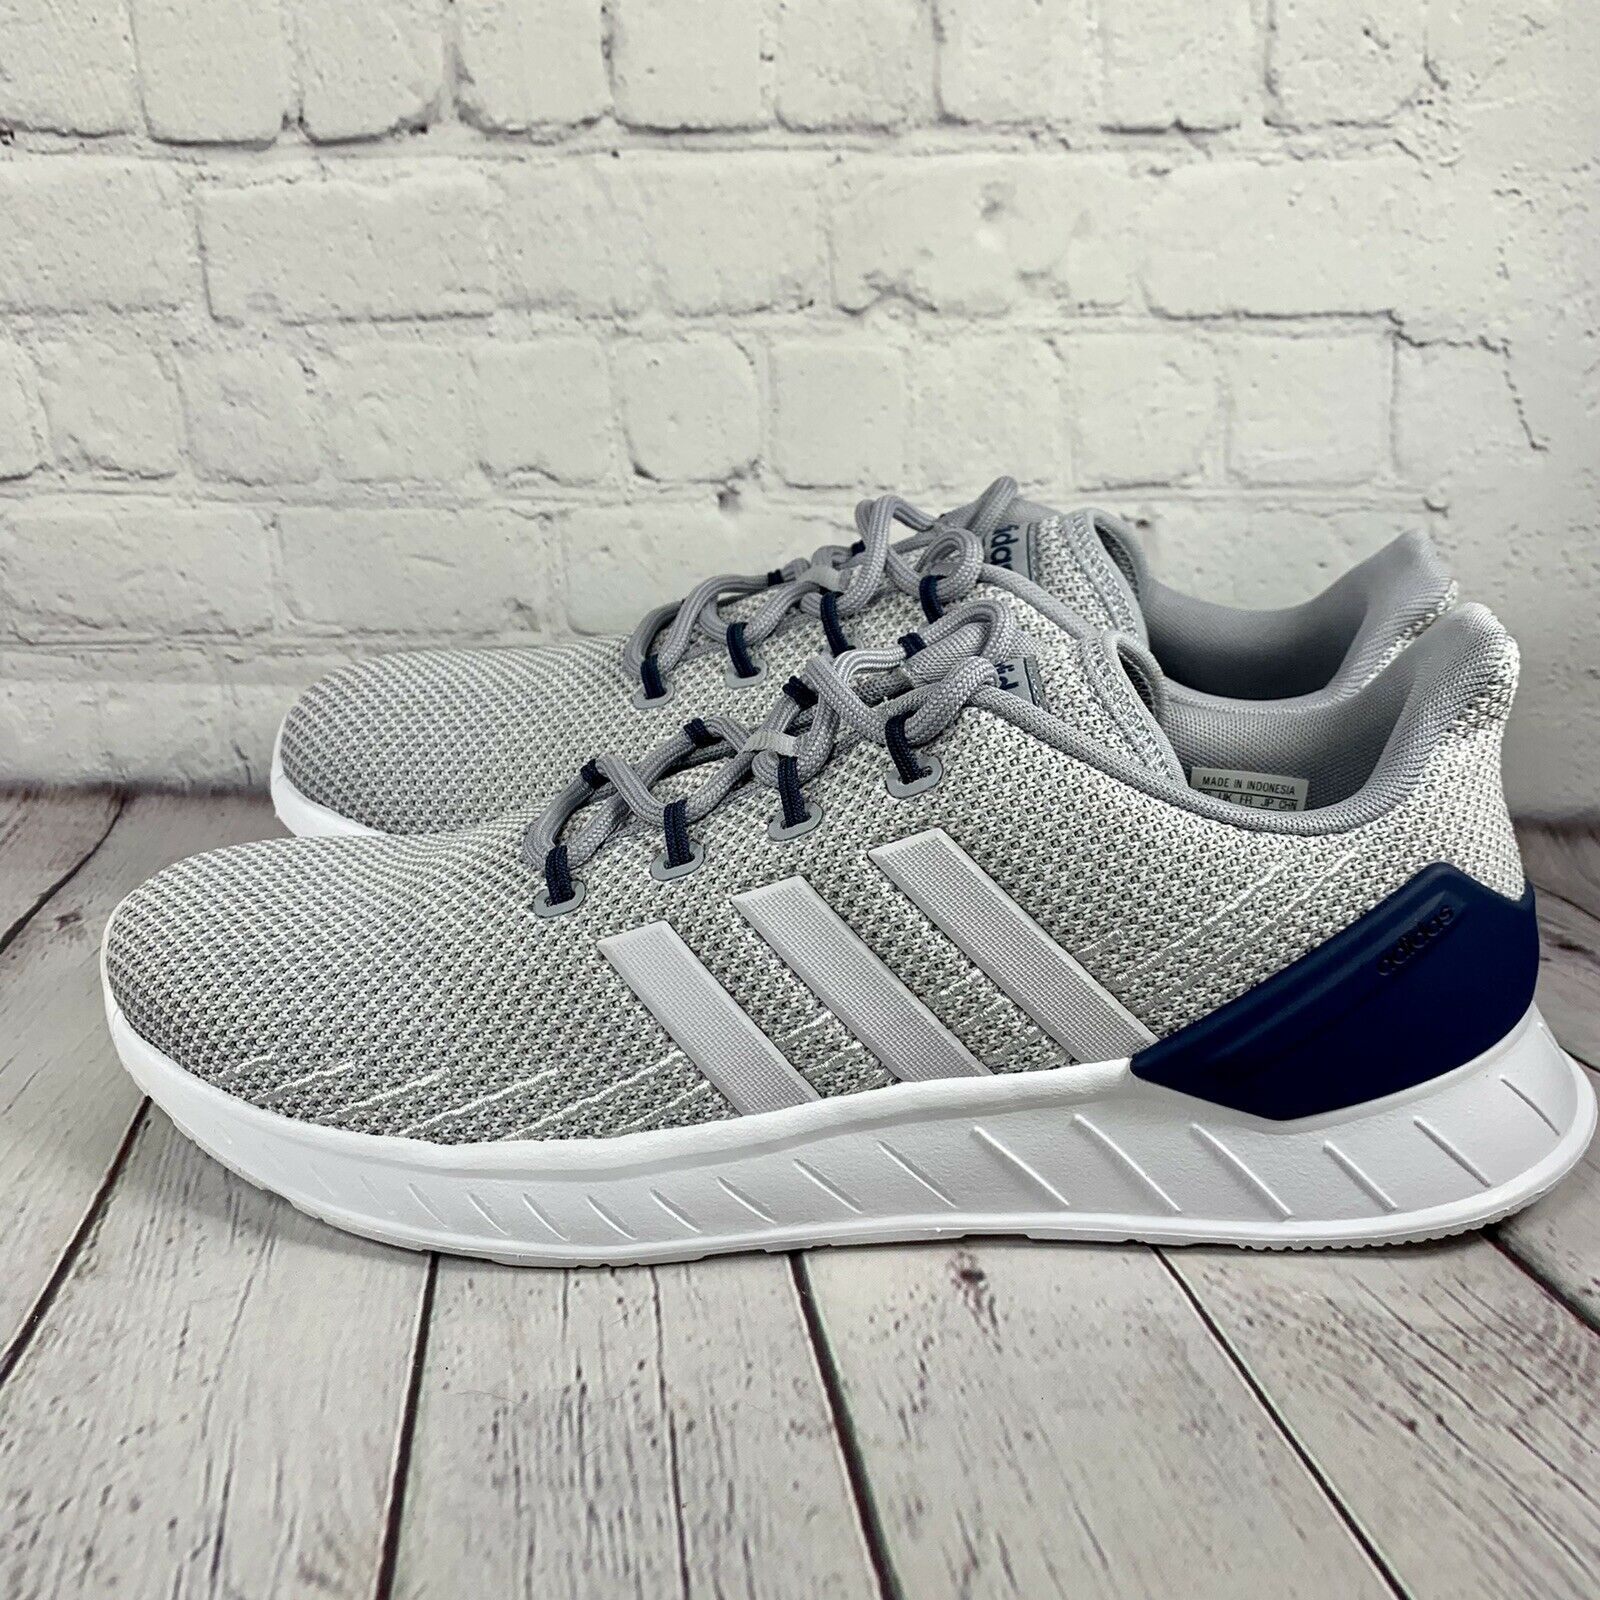 Adidas Questar Flow NXT low top walking running shoes Gray Navy White FY9565.